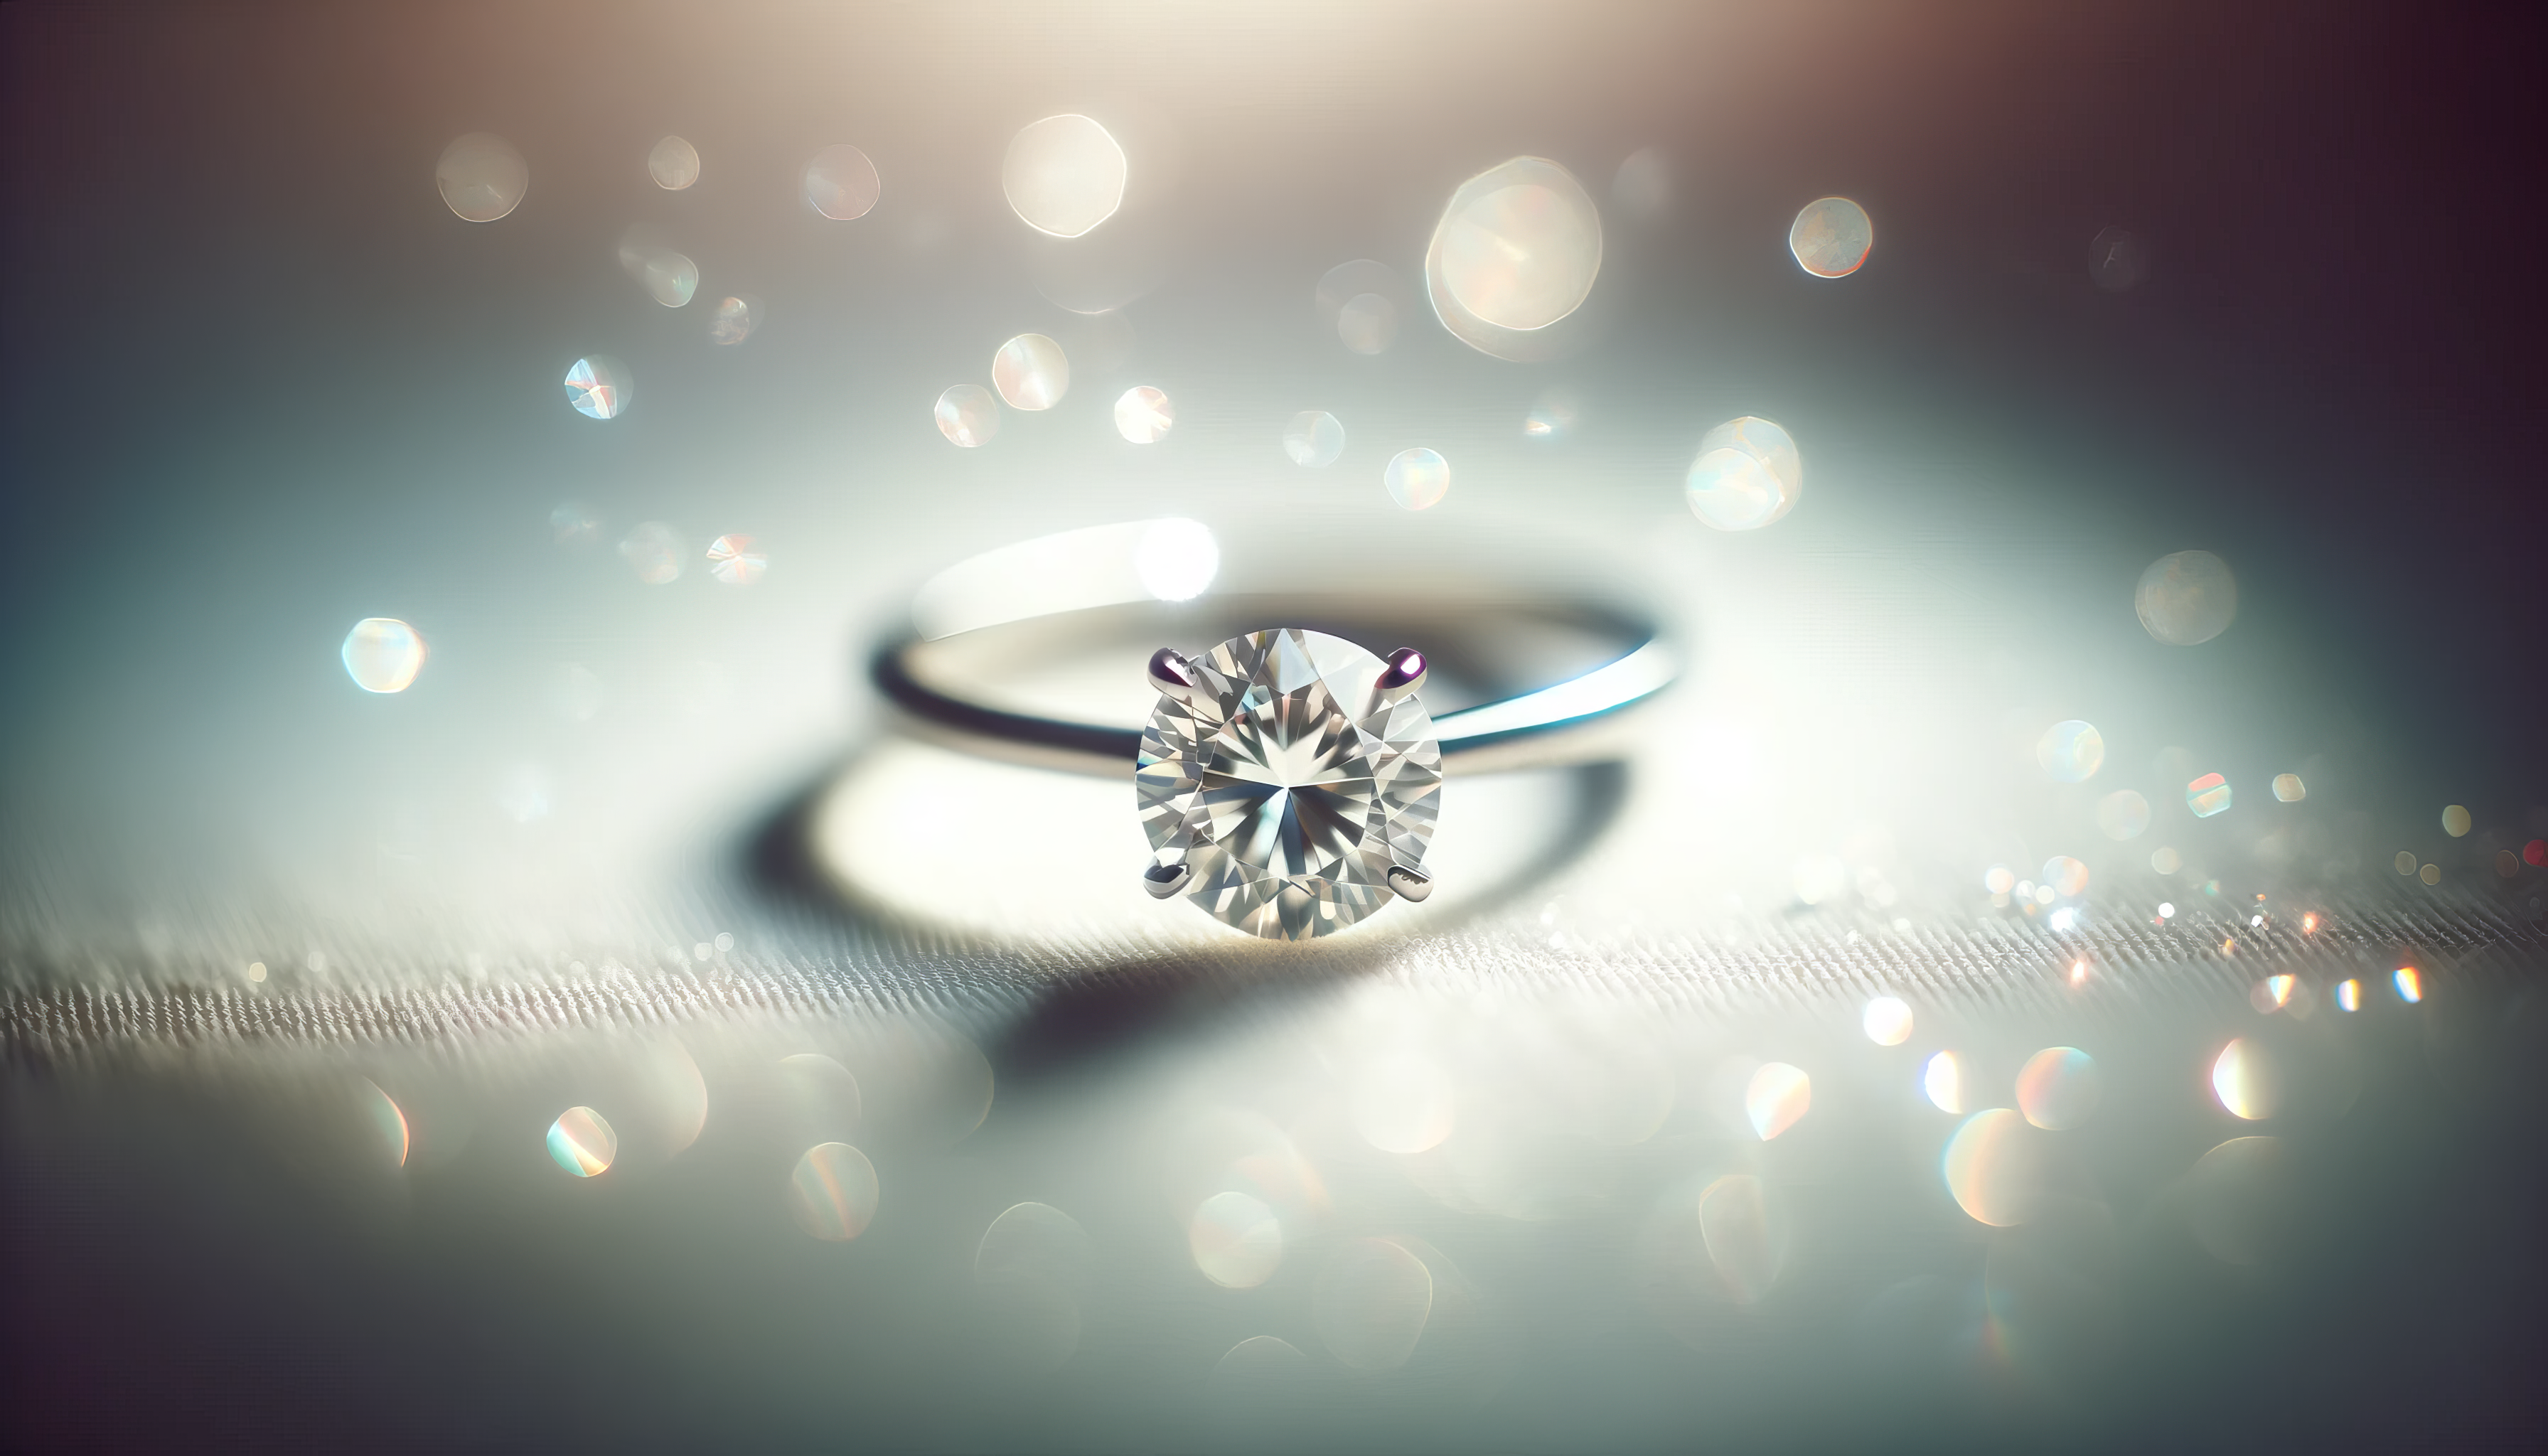 4 Carat Diamond Engagement Rings - Shop Now and Insider Advice